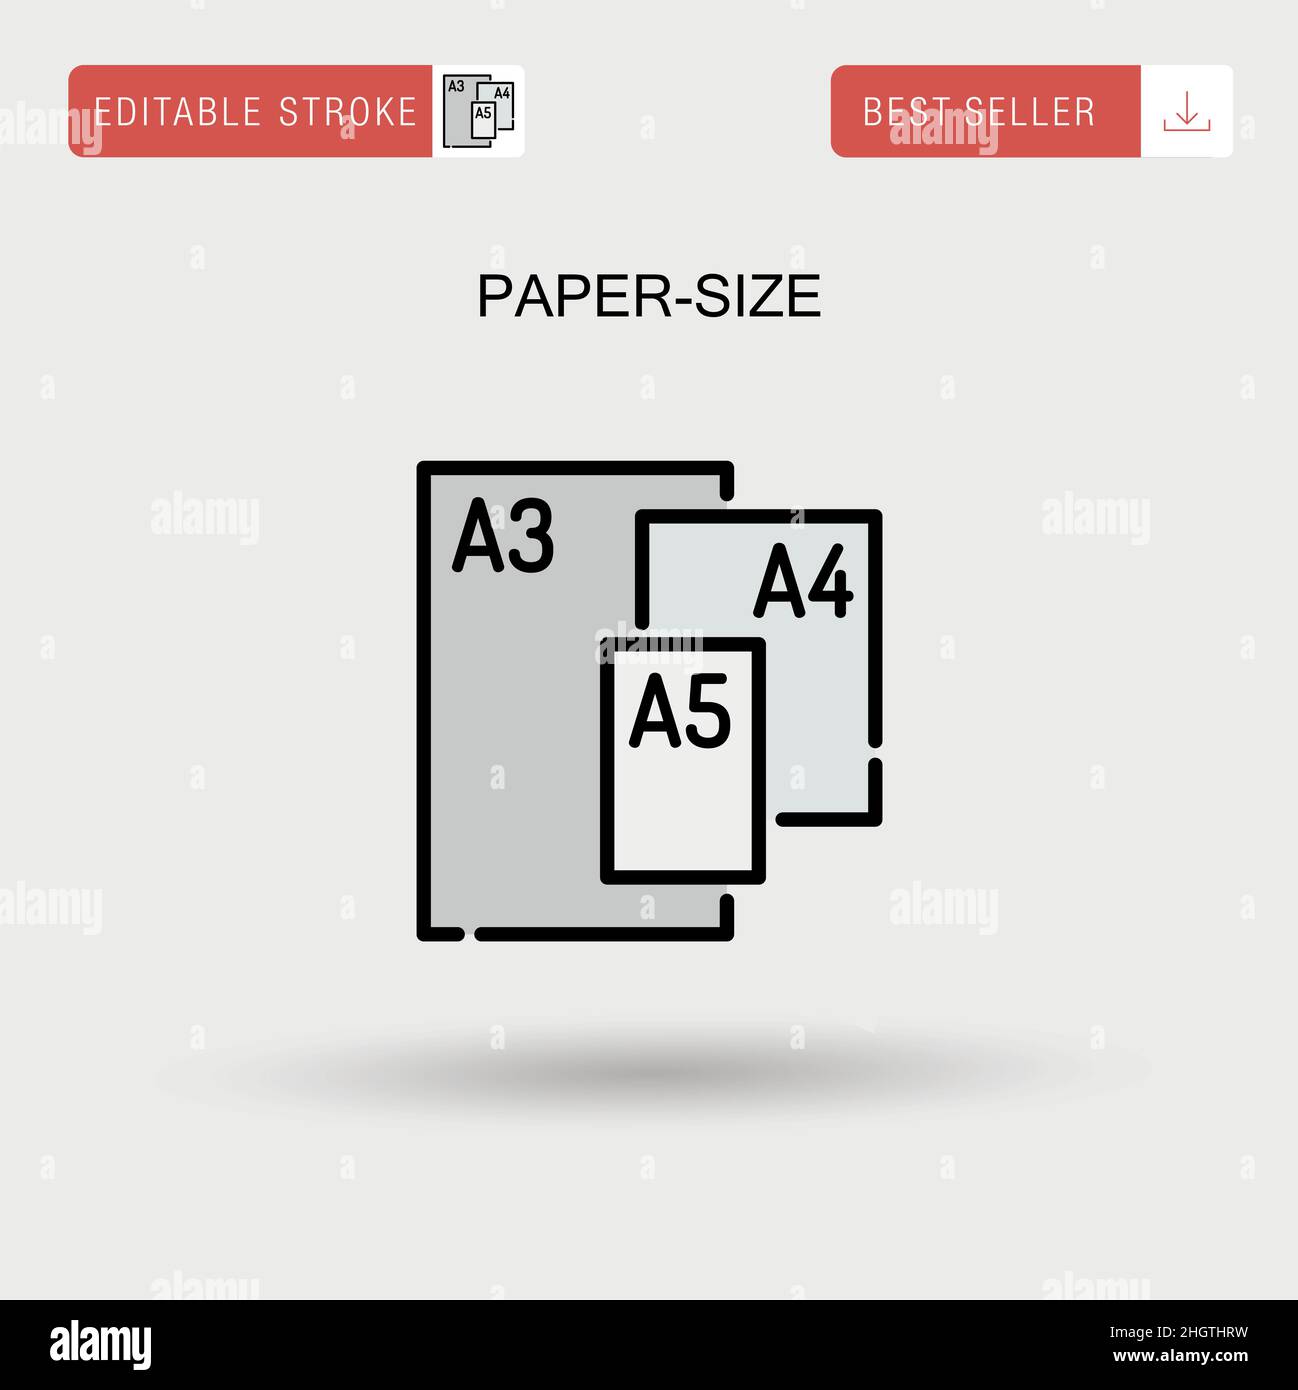 Paper Size Guide: A3+ & A4+